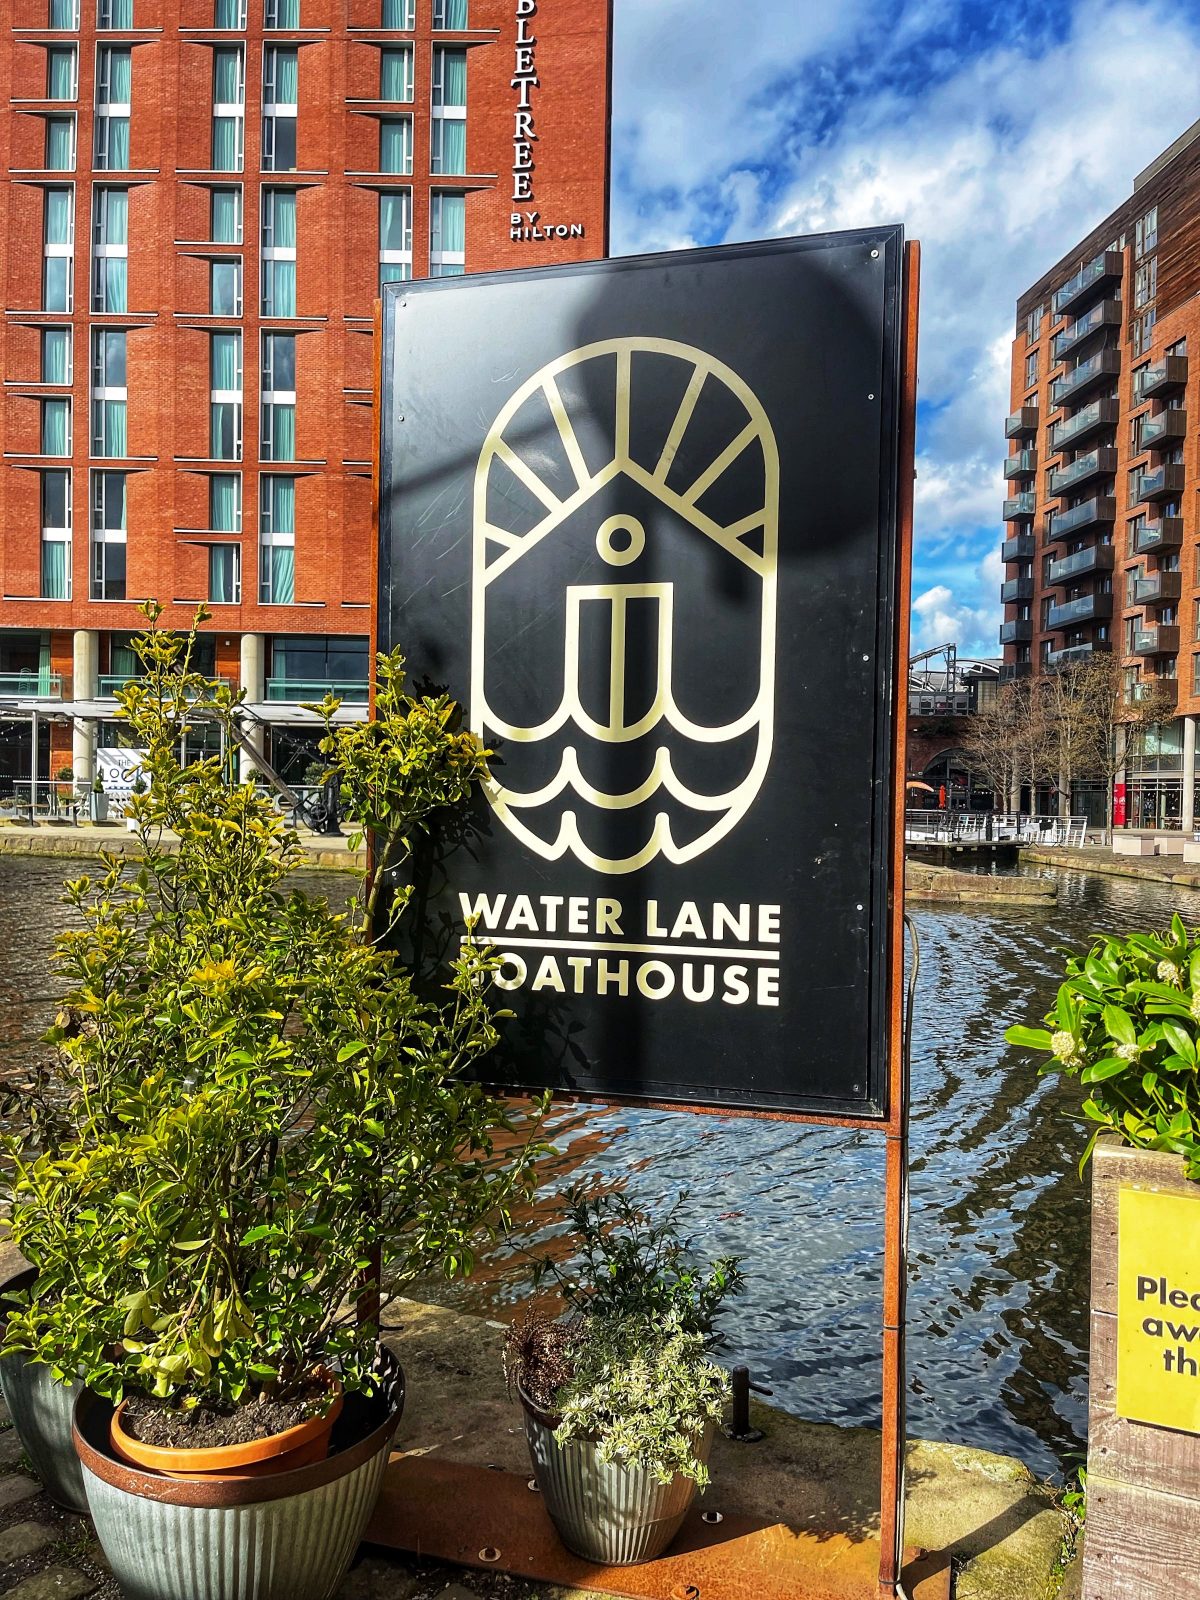 The sign of waterlane boathouse in Leeds.